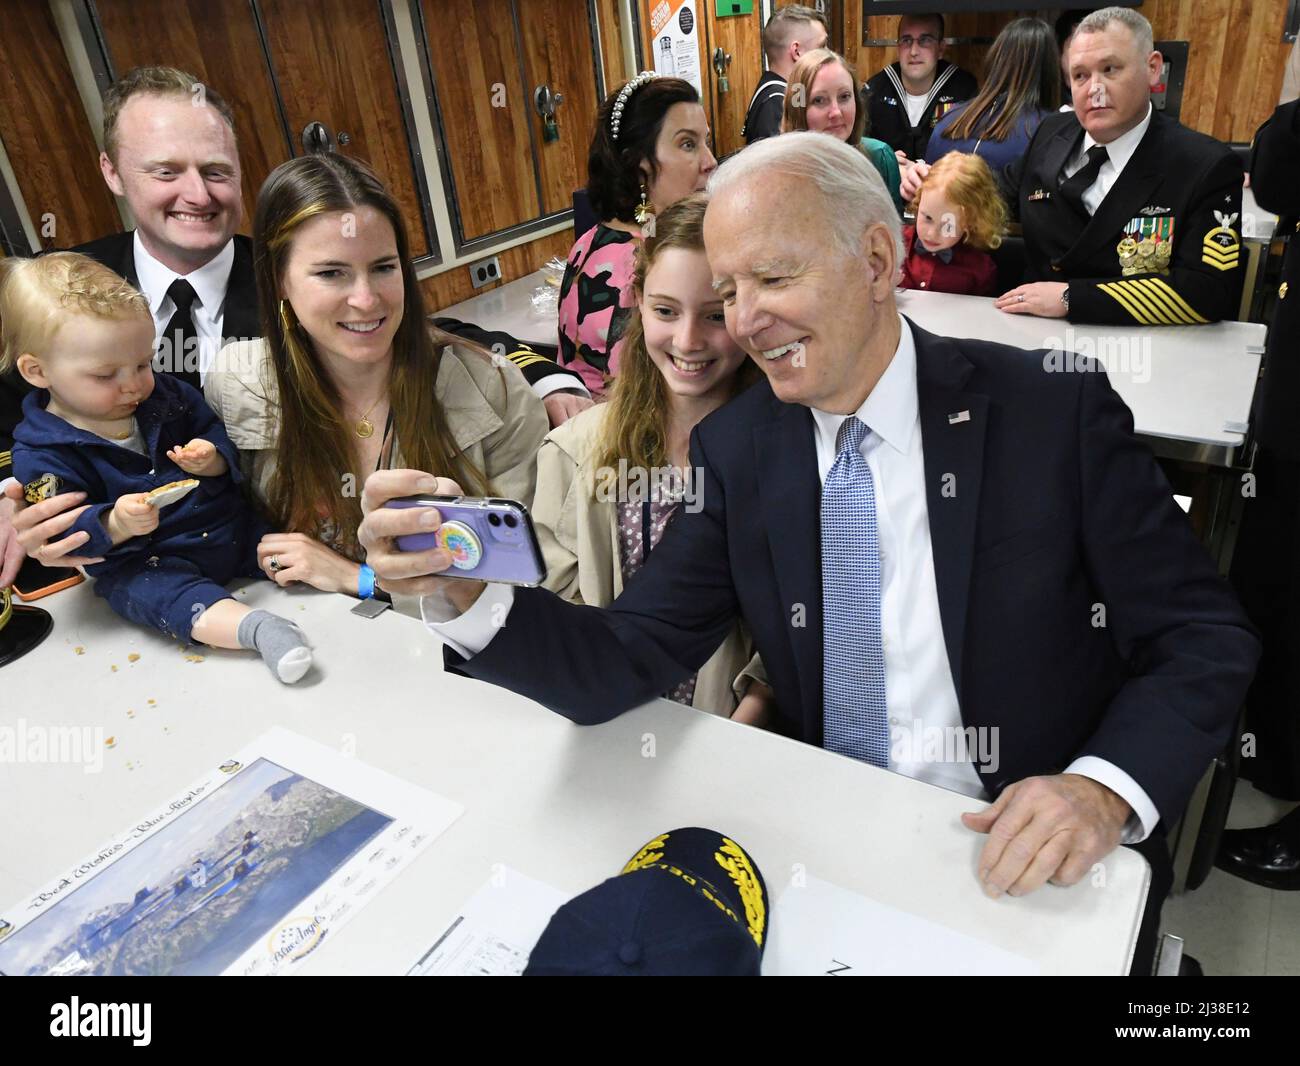 Wilmington, United States of America. 02 April, 2022. U.S President Joe Biden, takes a selfie with Lt. Cmdr. Adam Parkinson and his family on board the Virginia-class submarine USS Delaware following the commissioning ceremony, April 2, 2022 in Wilmington, Delaware.  Credit: CPO Joshua Karsten/US Navy/Alamy Live News Stock Photo